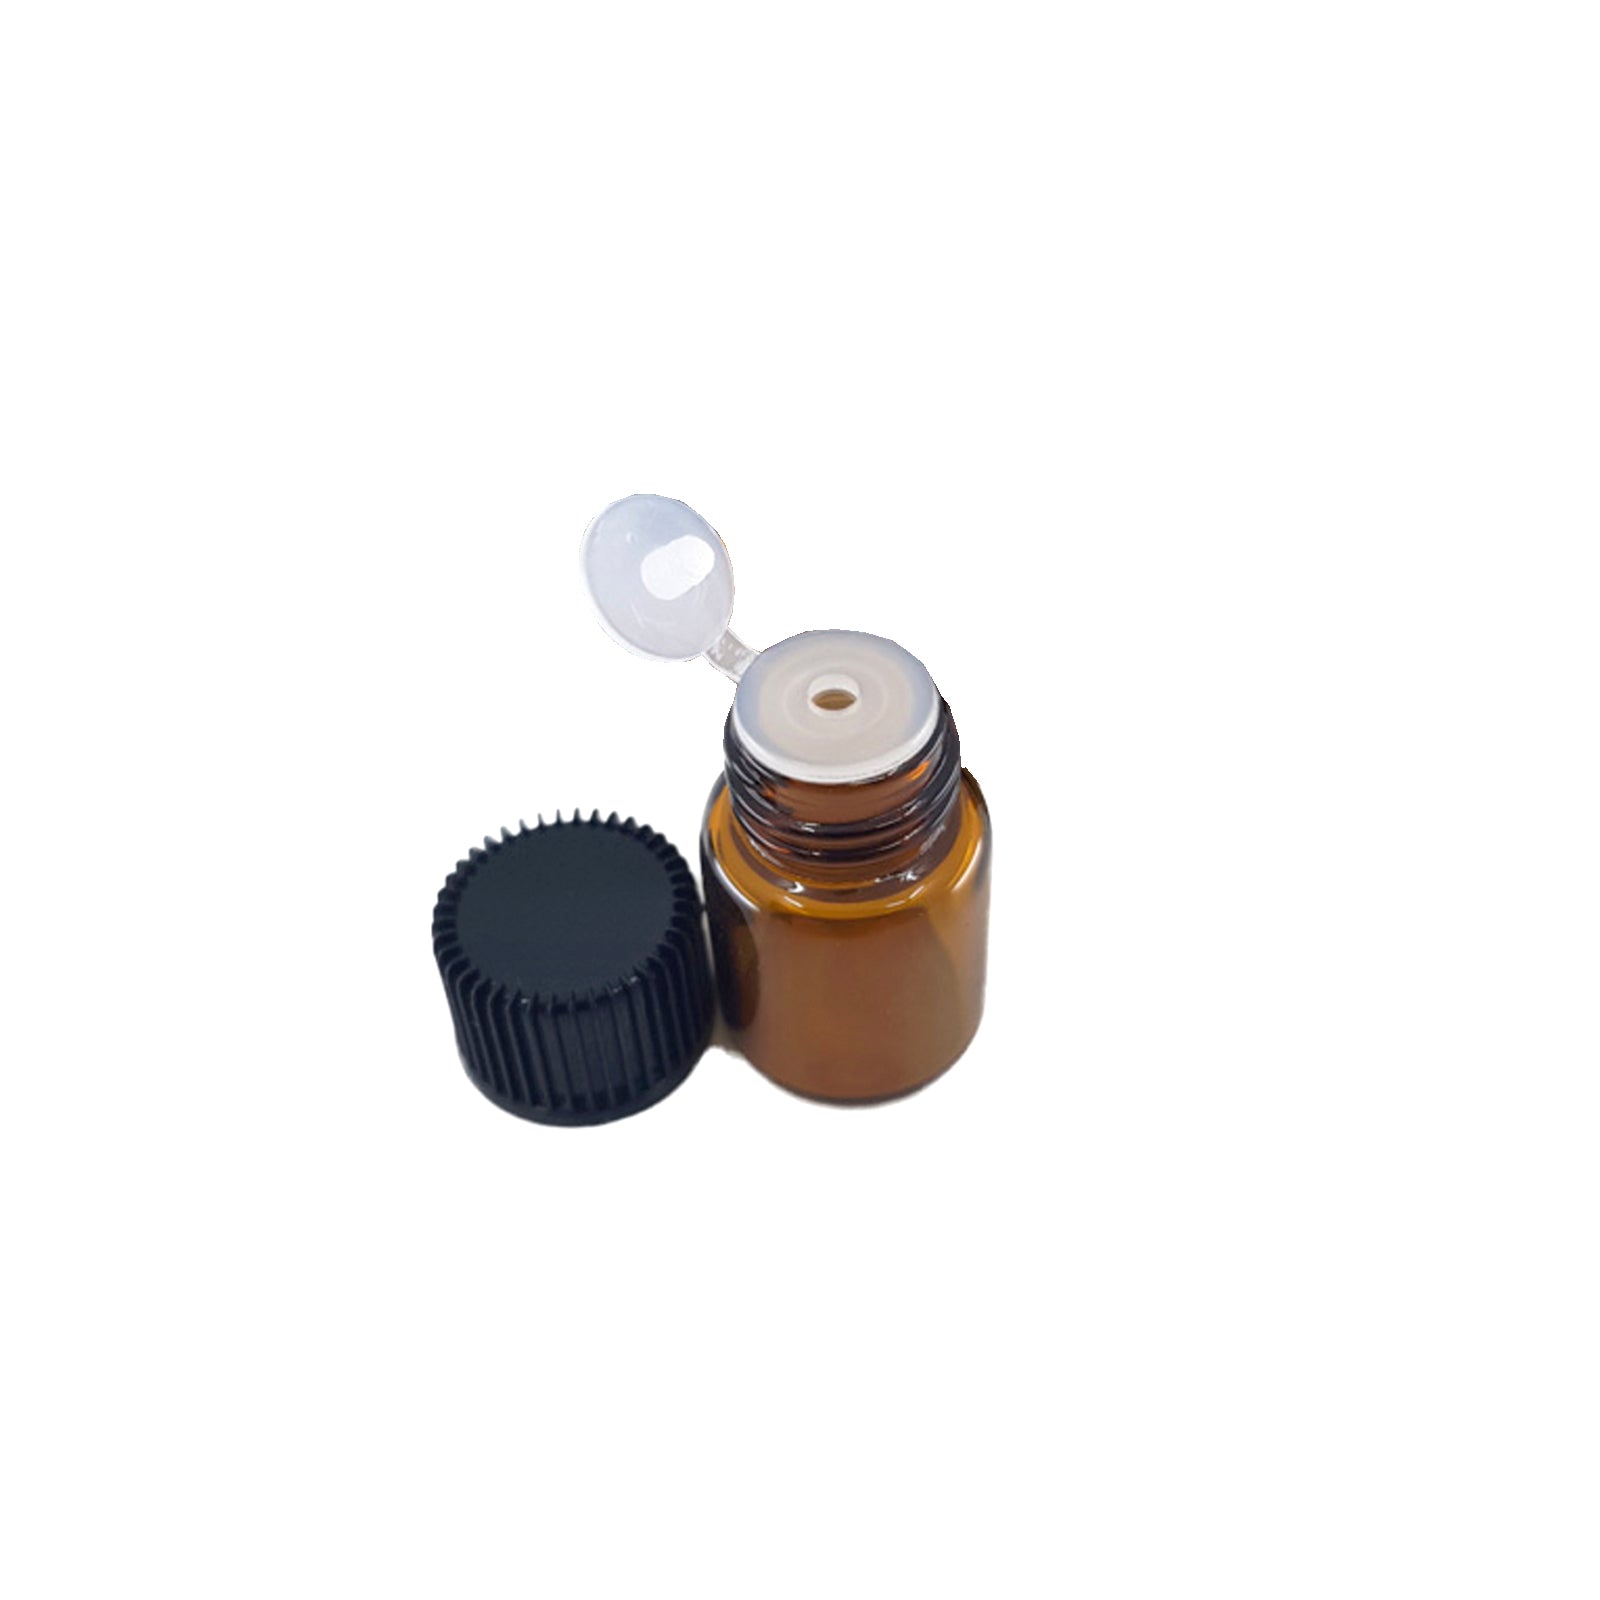 Glass bottle with resealable dropper cap 1-3ml